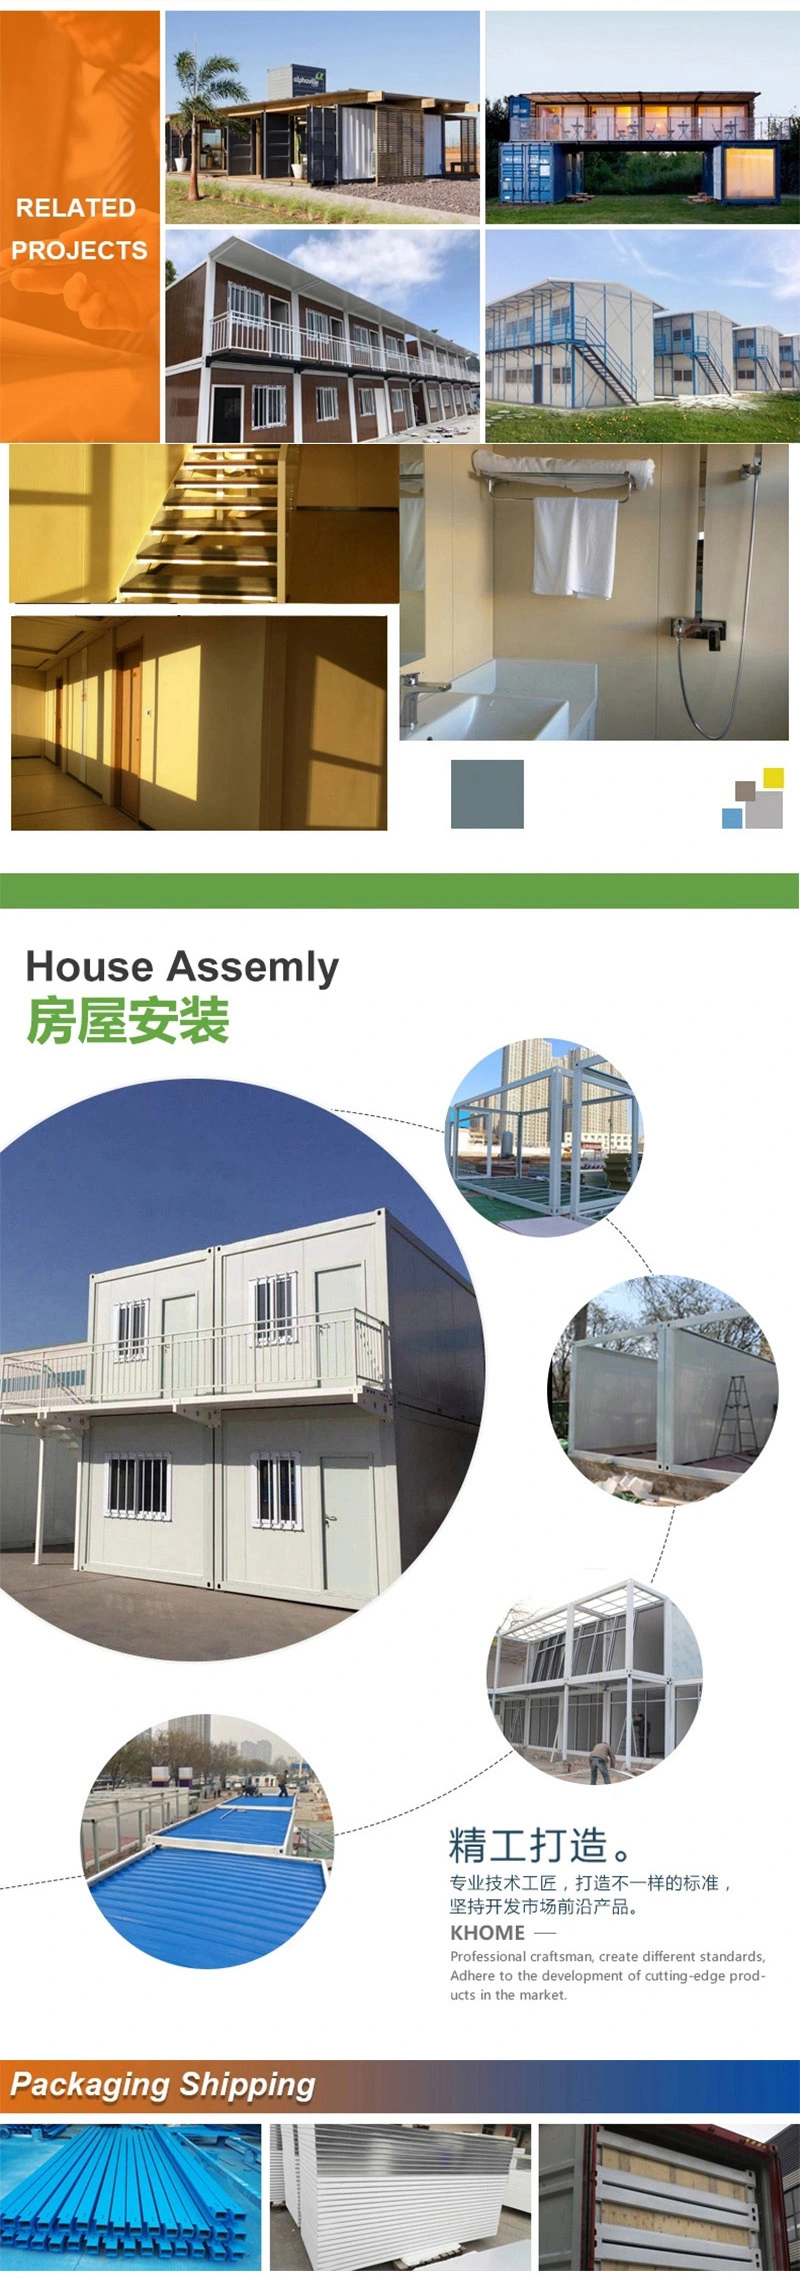 prefabricated mobile container house,prefabricated house container house,prefabricated container house suppliers,prefabricated portable container house,prefabricated steel container house